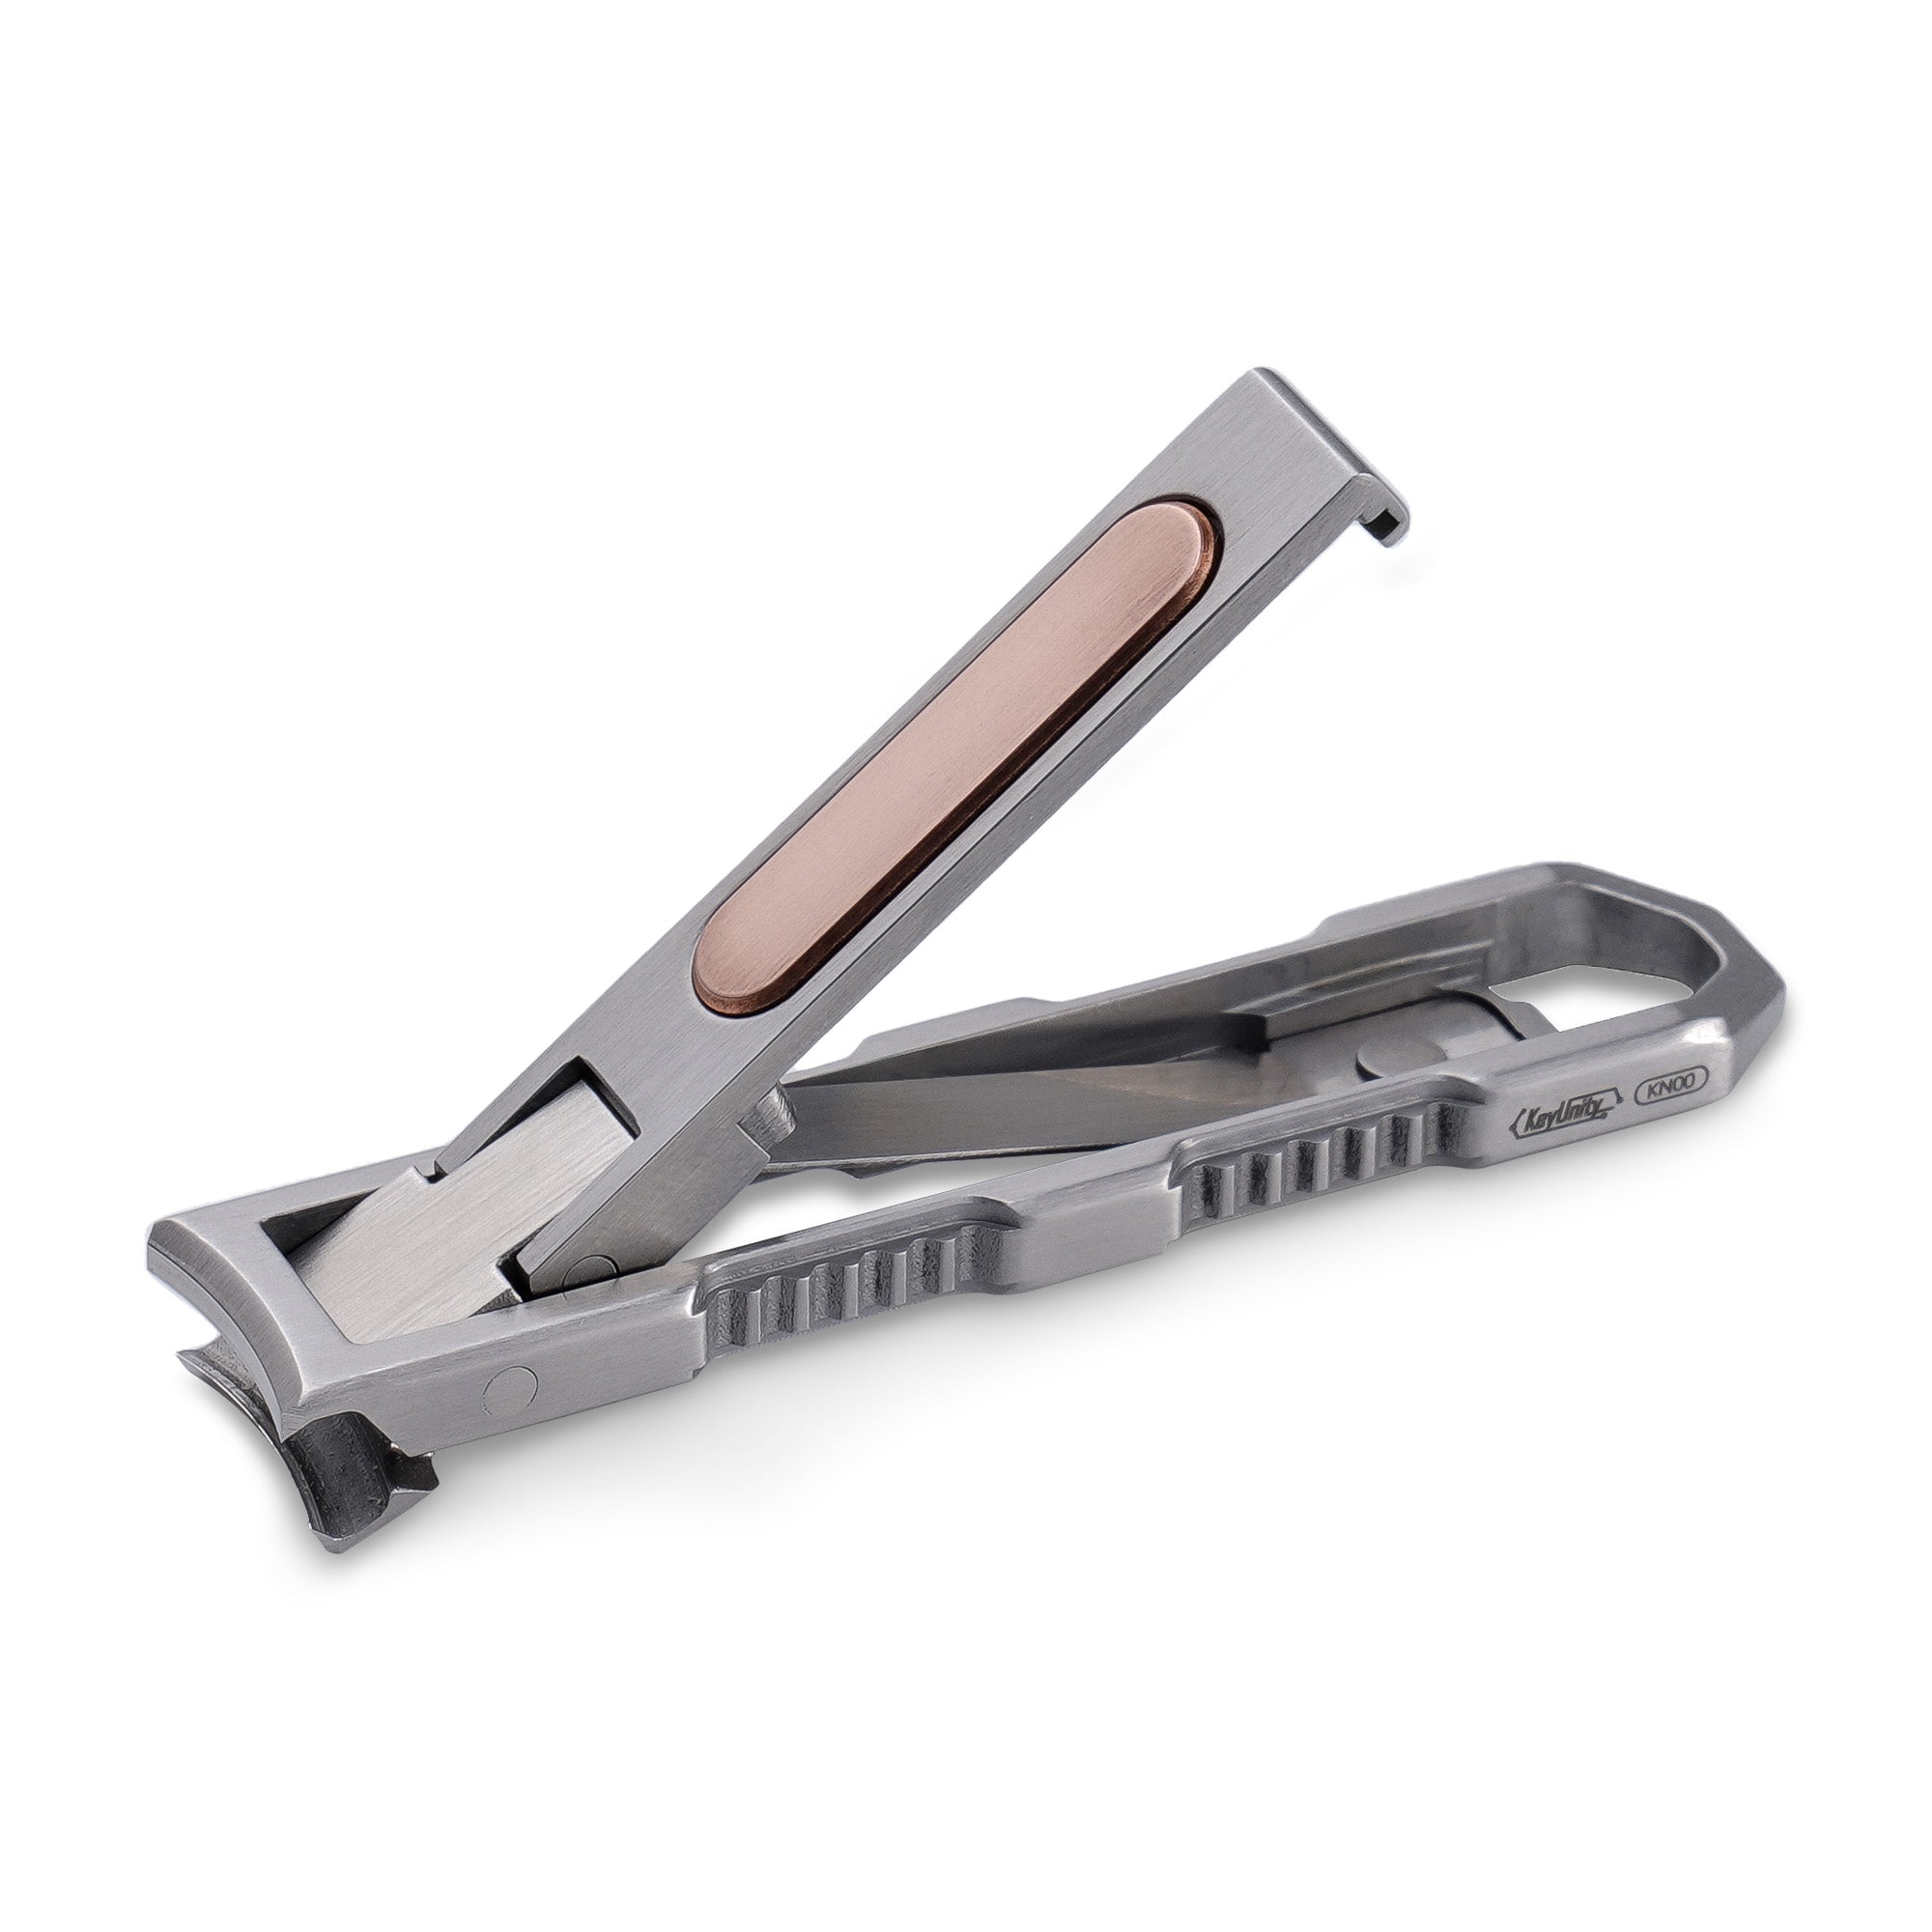 Klhip Ultimate Nail Clippers Review